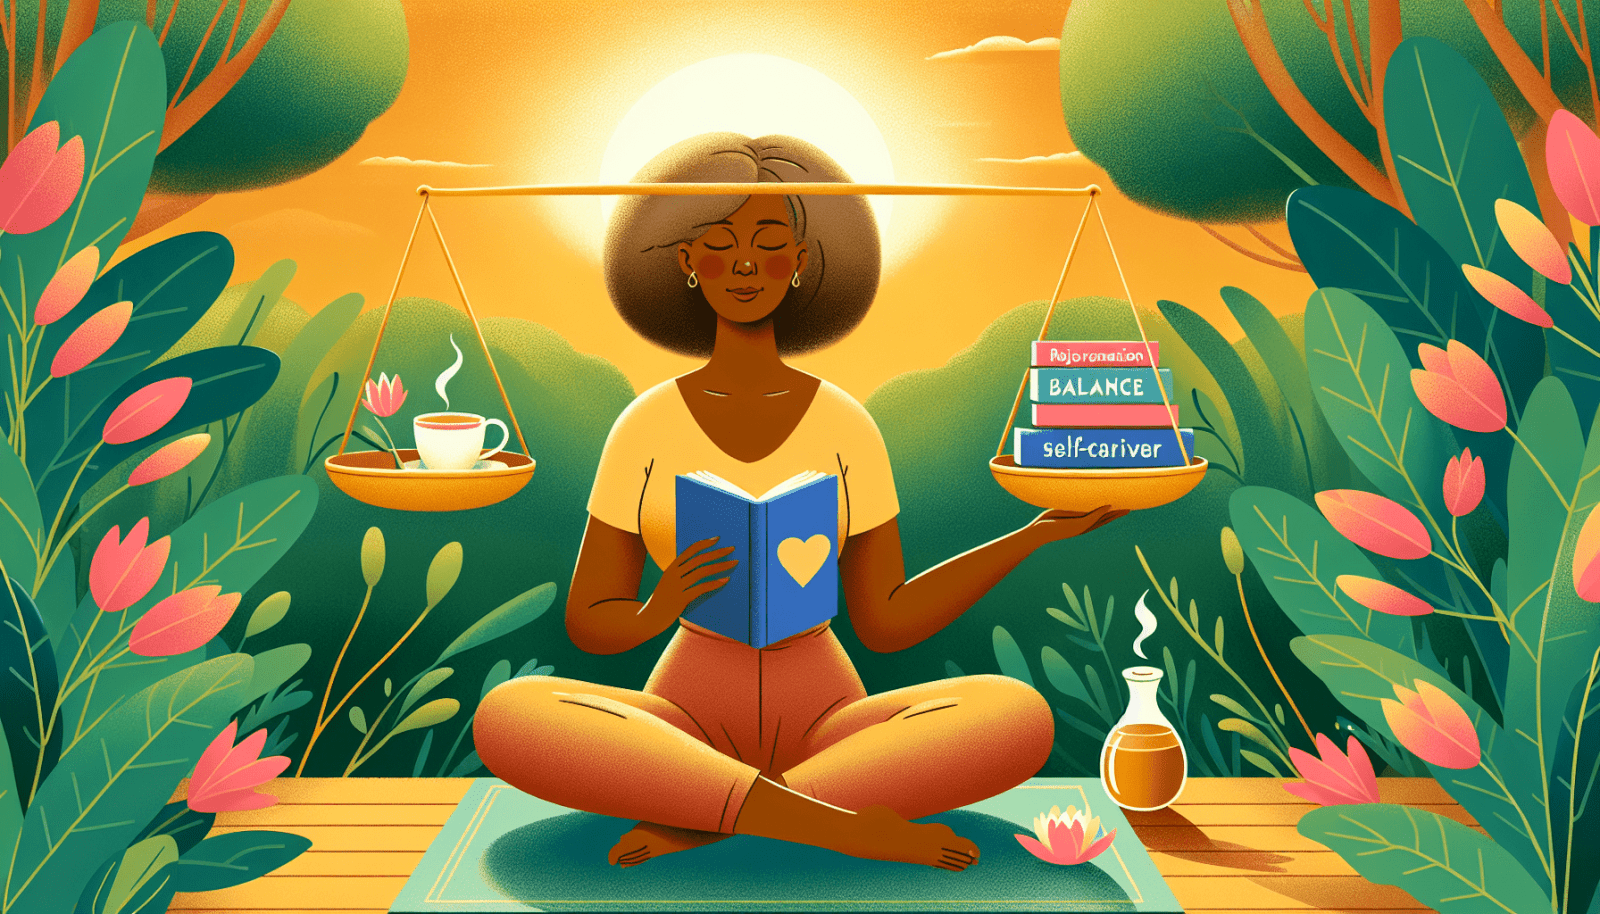 Illustration of a serene woman sitting cross-legged on a yoga mat, holding a book with a heart on the cover, and with a balanced scale above her head bearing words "procrastination" and "self-care." In a garden with lush foliage, a steaming cup of tea, and a bottle, with the backdrop of a setting or rising sun.